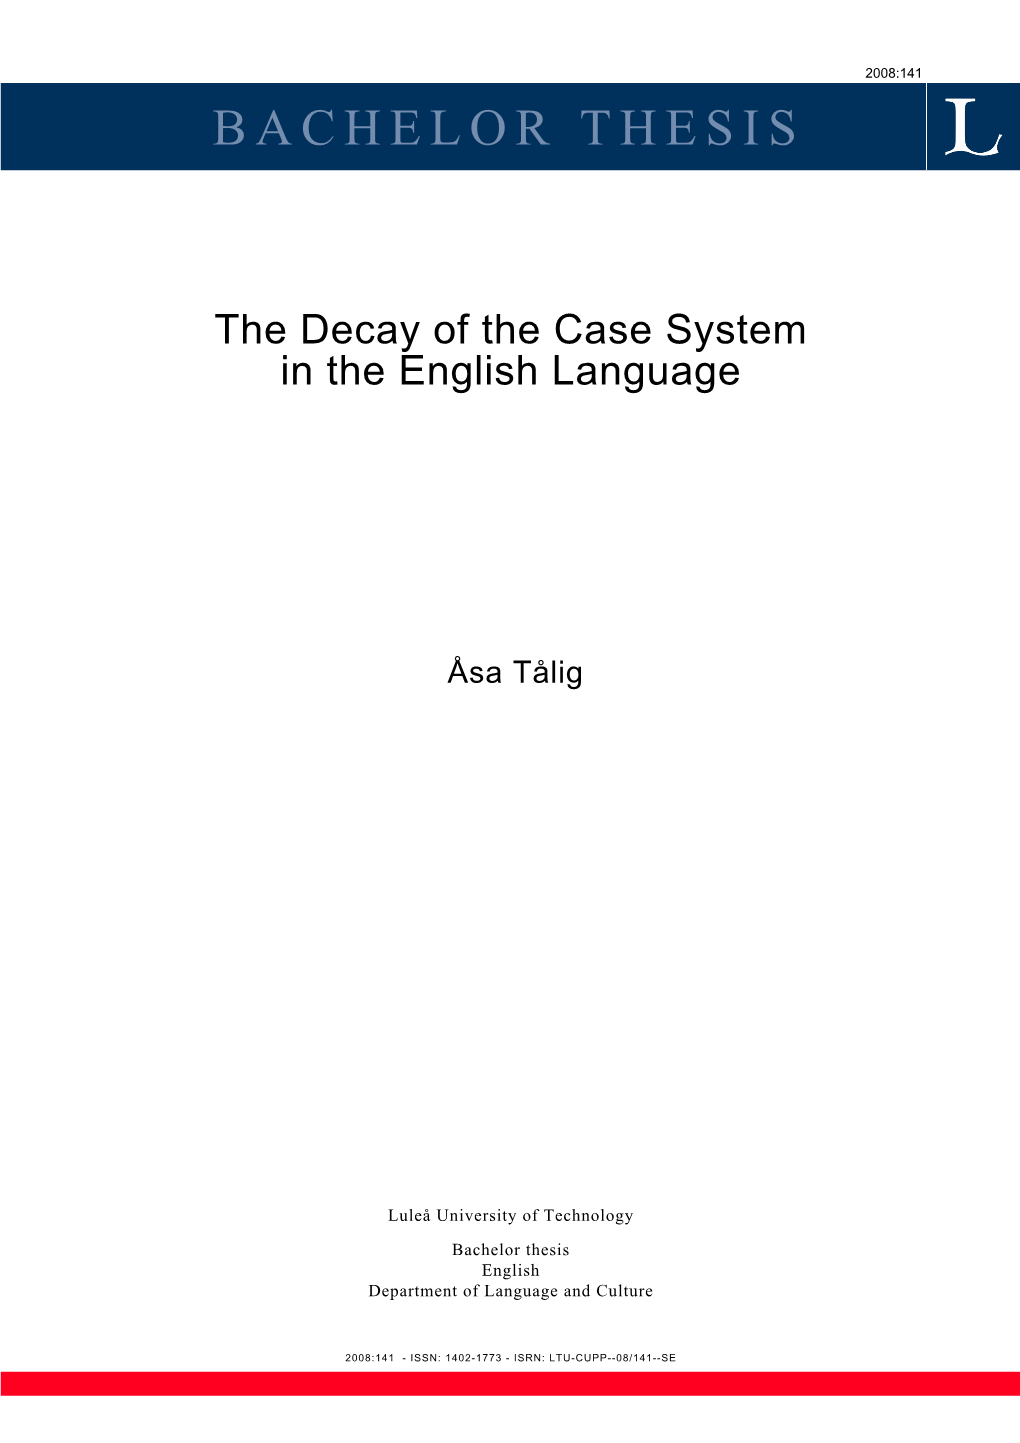 The Decay of the Case System in the English Language